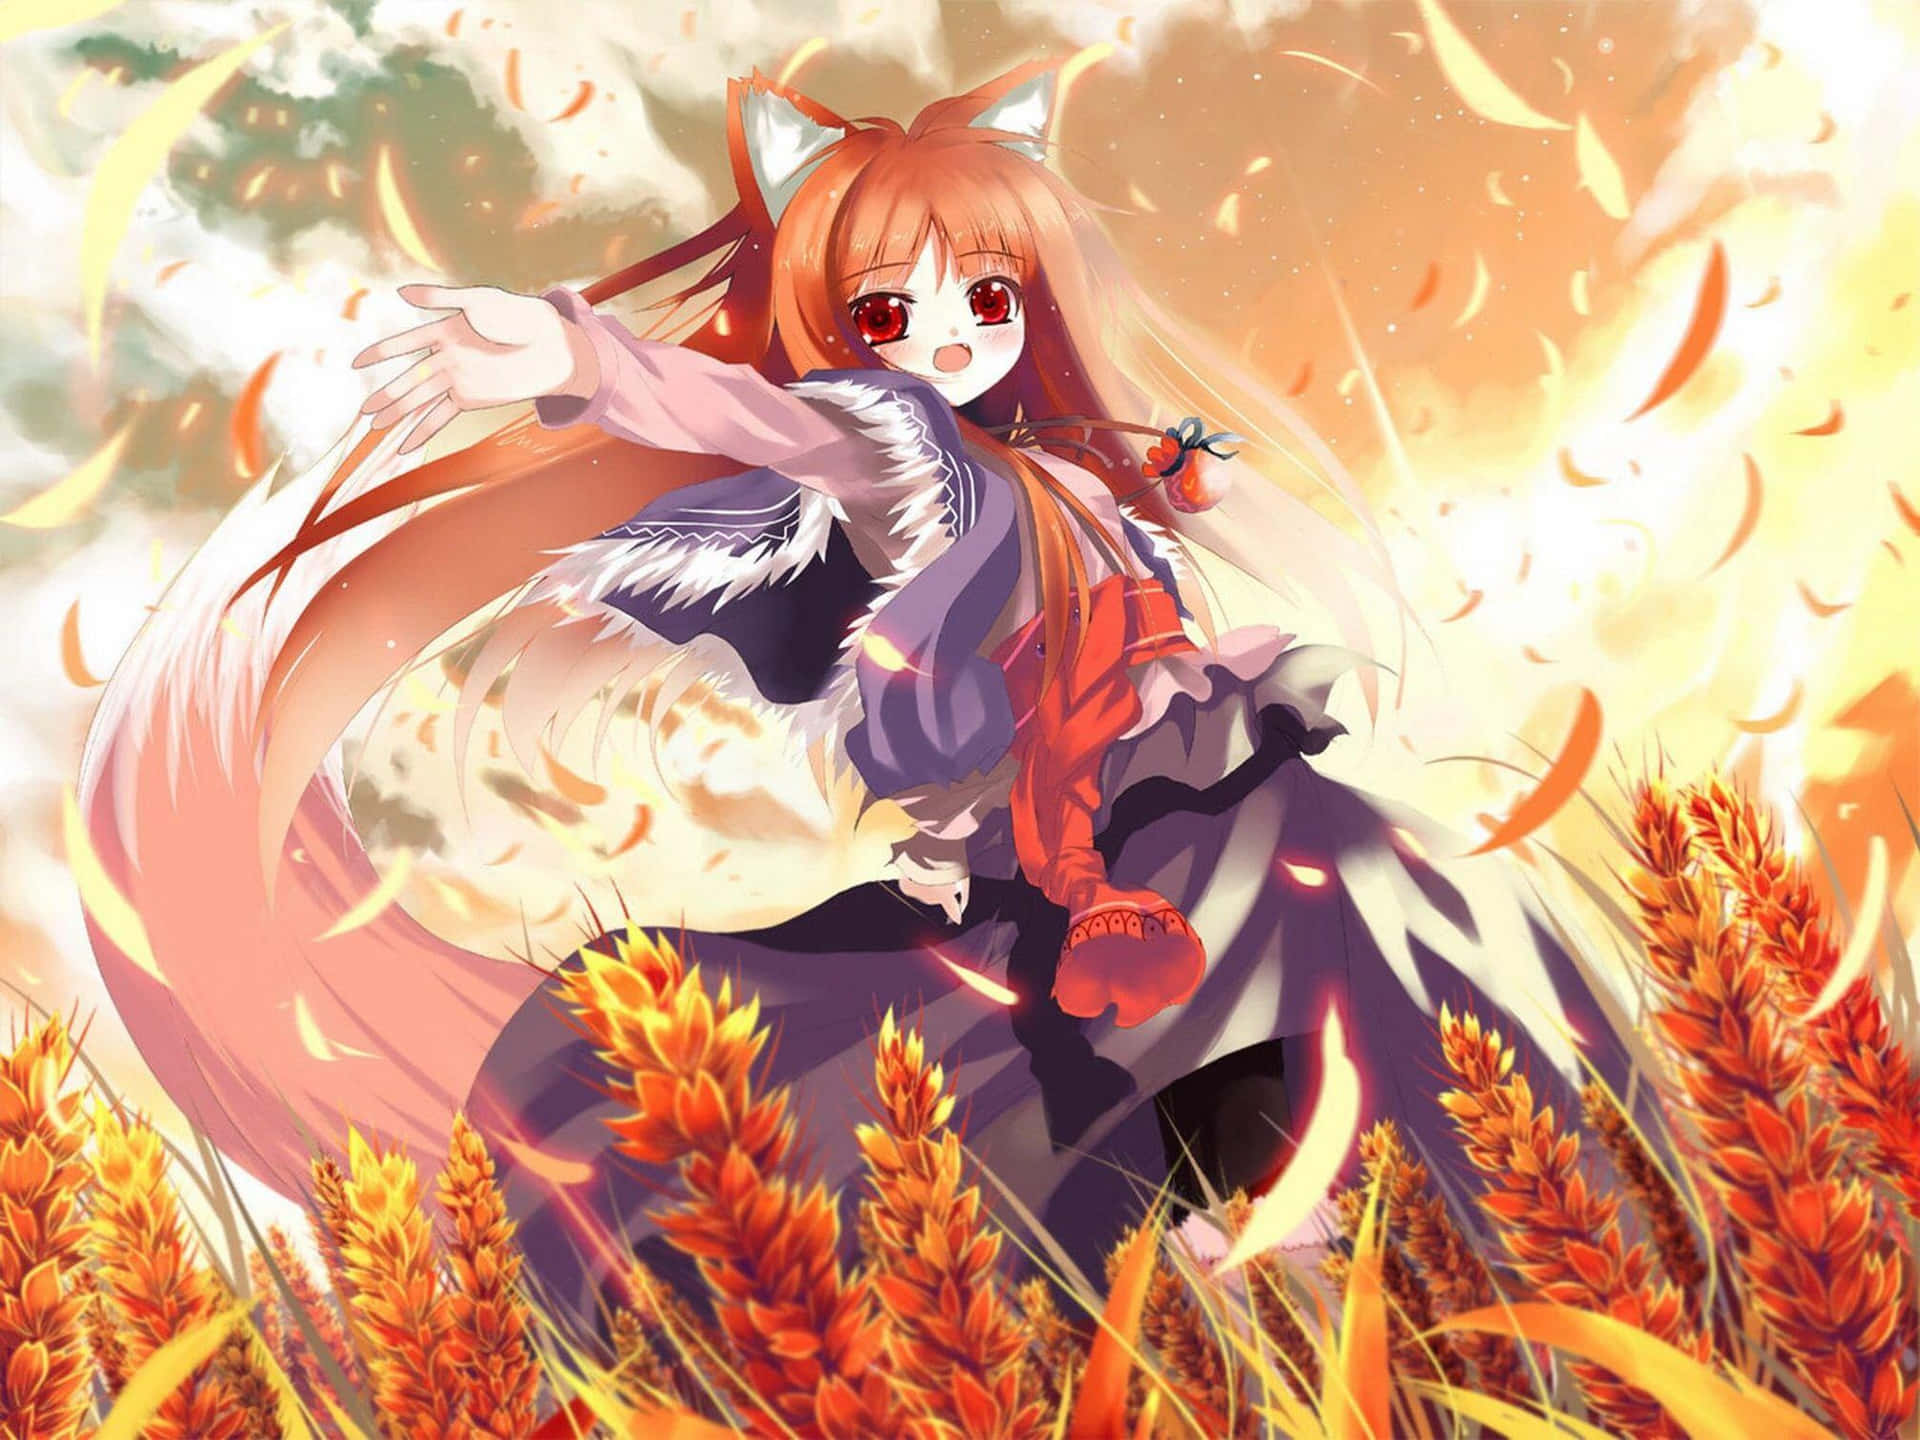 Cute Anime Girl Spice And Wolf Wallpaper